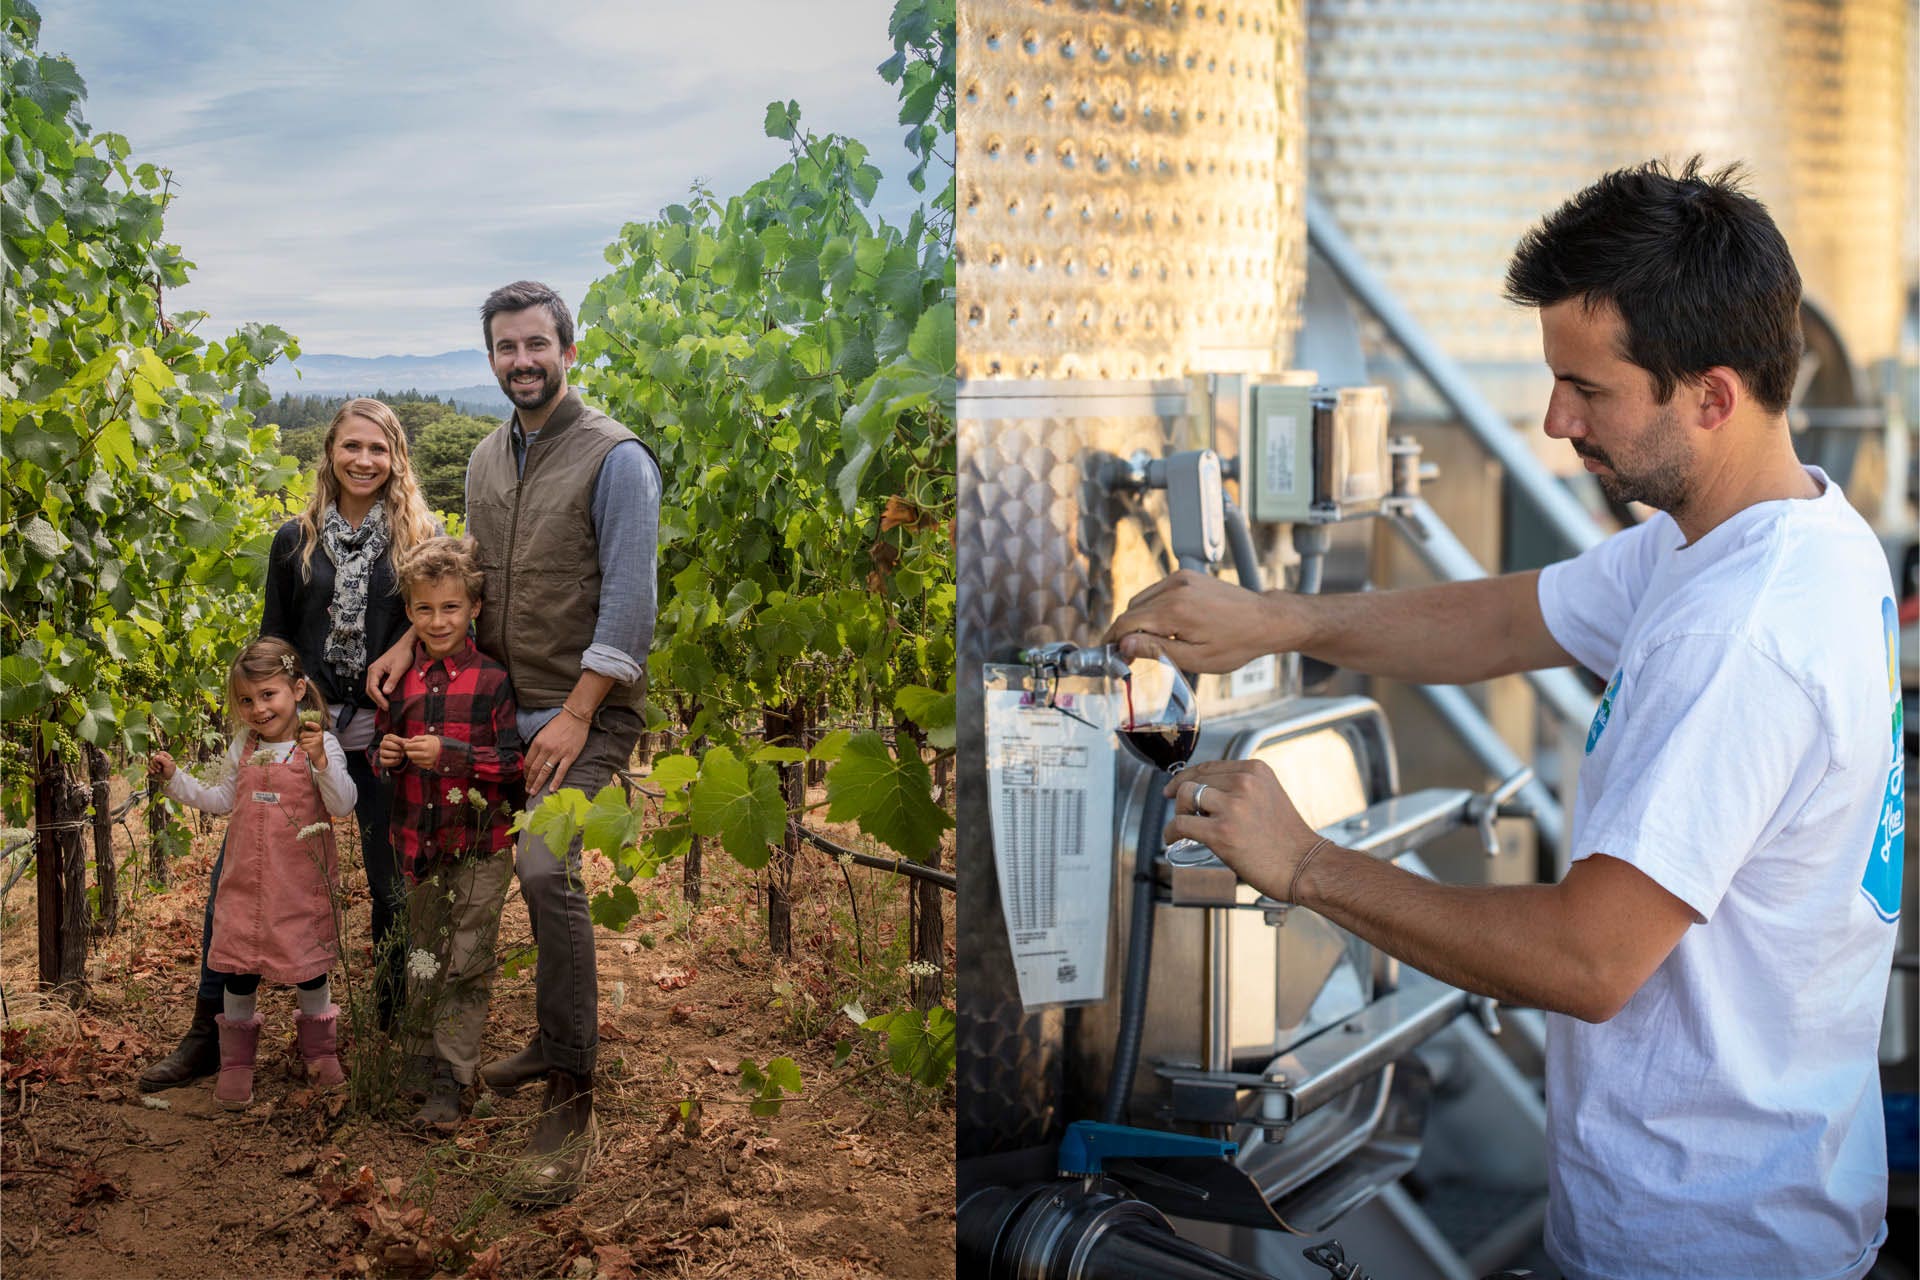 Winemaker with family